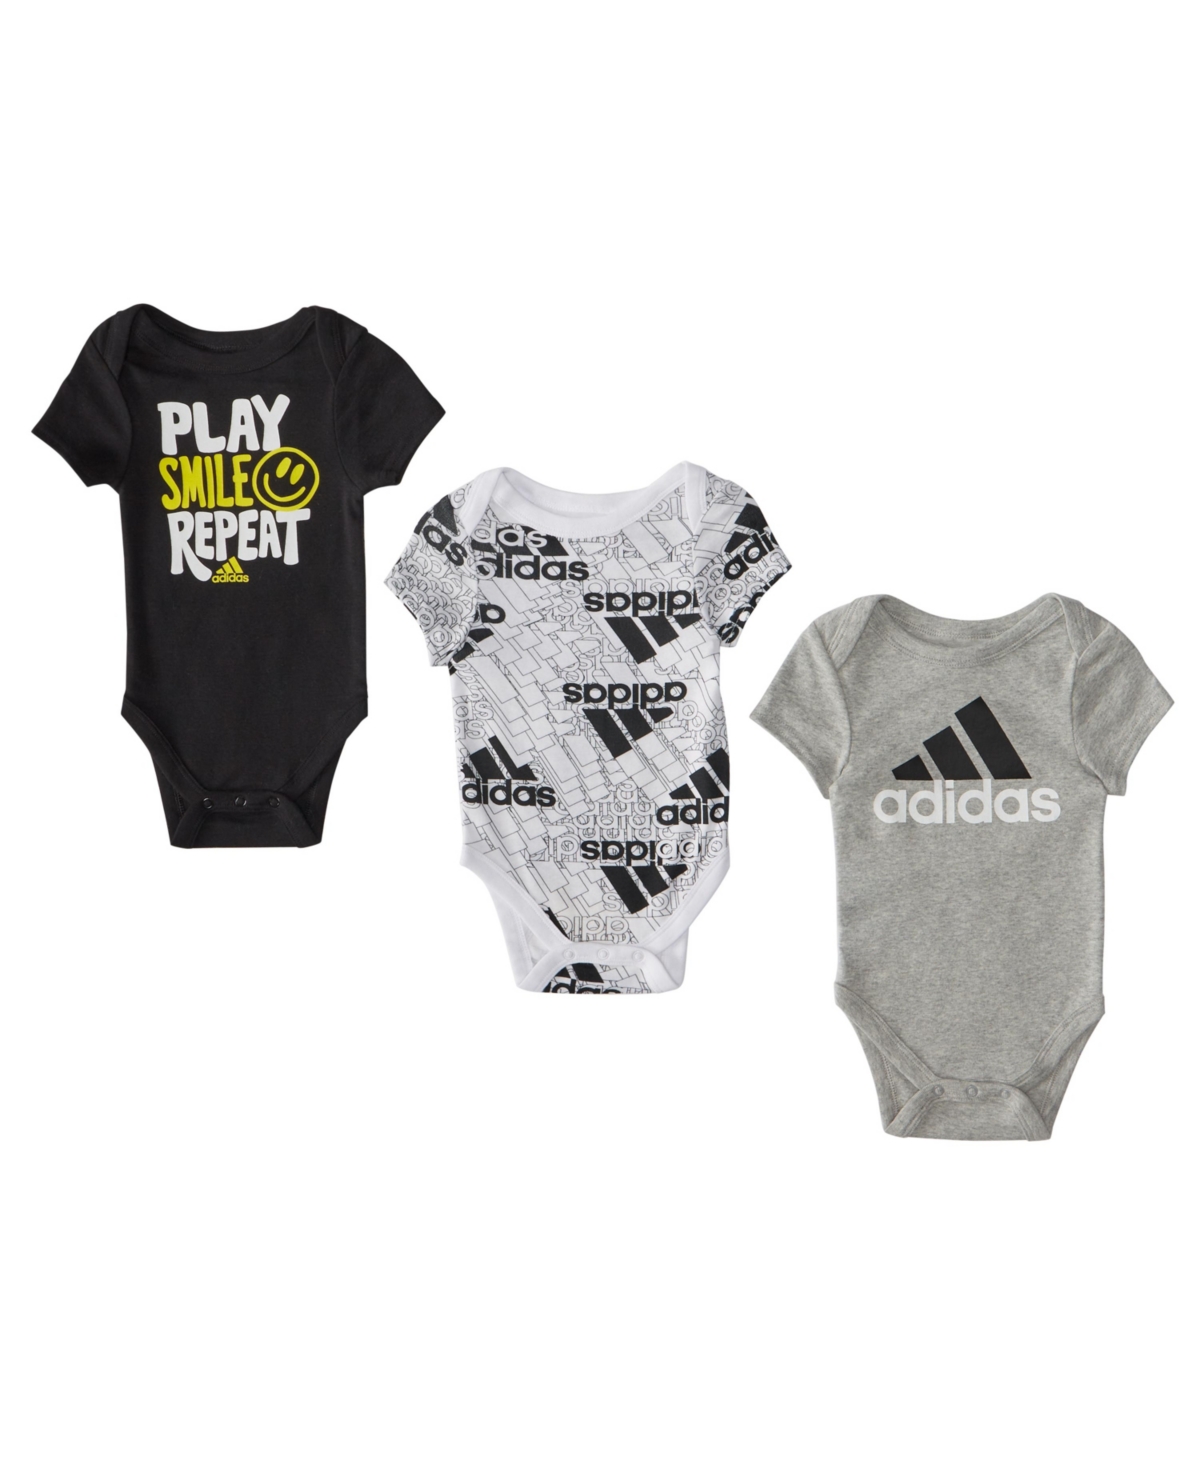 adidas Baby Boys or Baby Girls Short Sleeve Bodysuits, Pack of 3